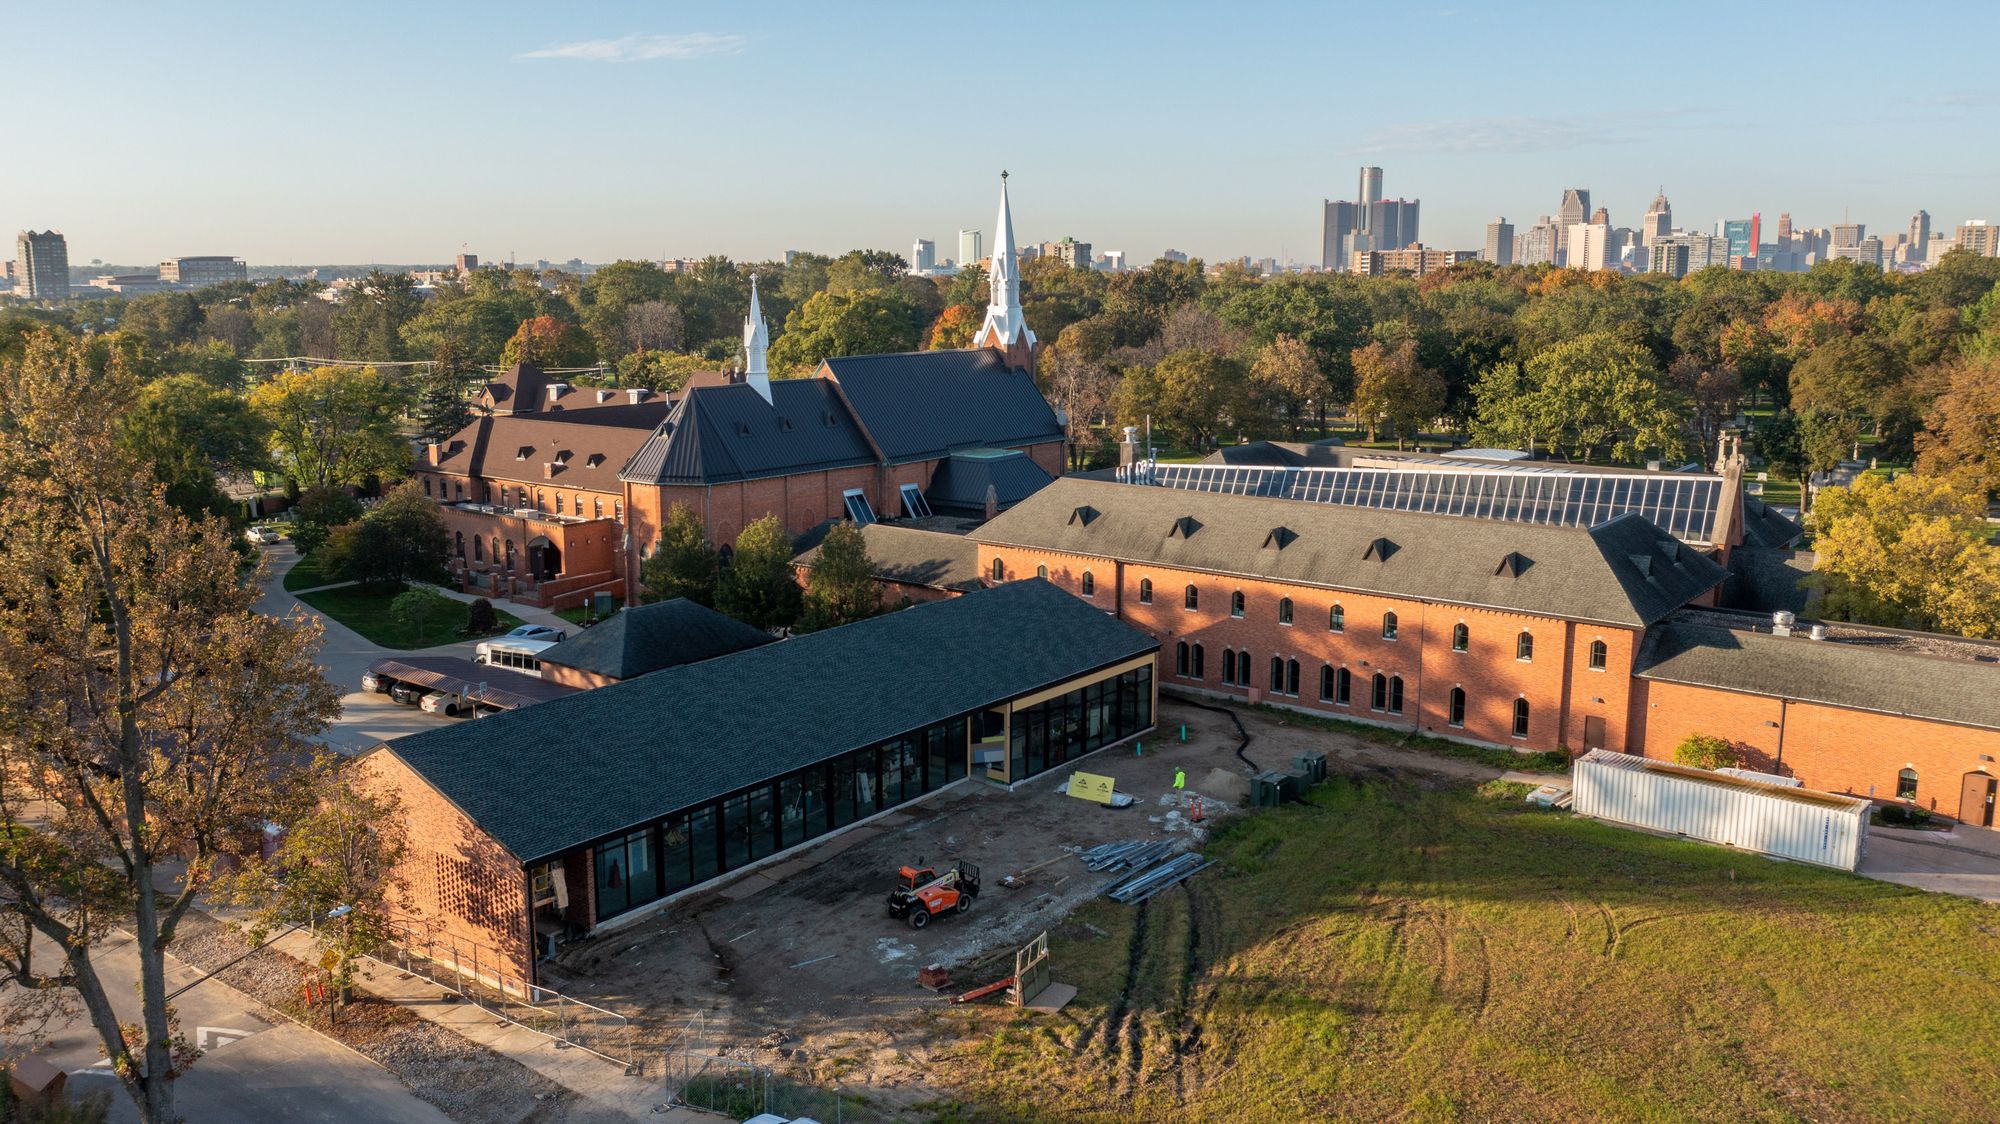 View of the Solanus Casey Center with the new building addition in the foreground